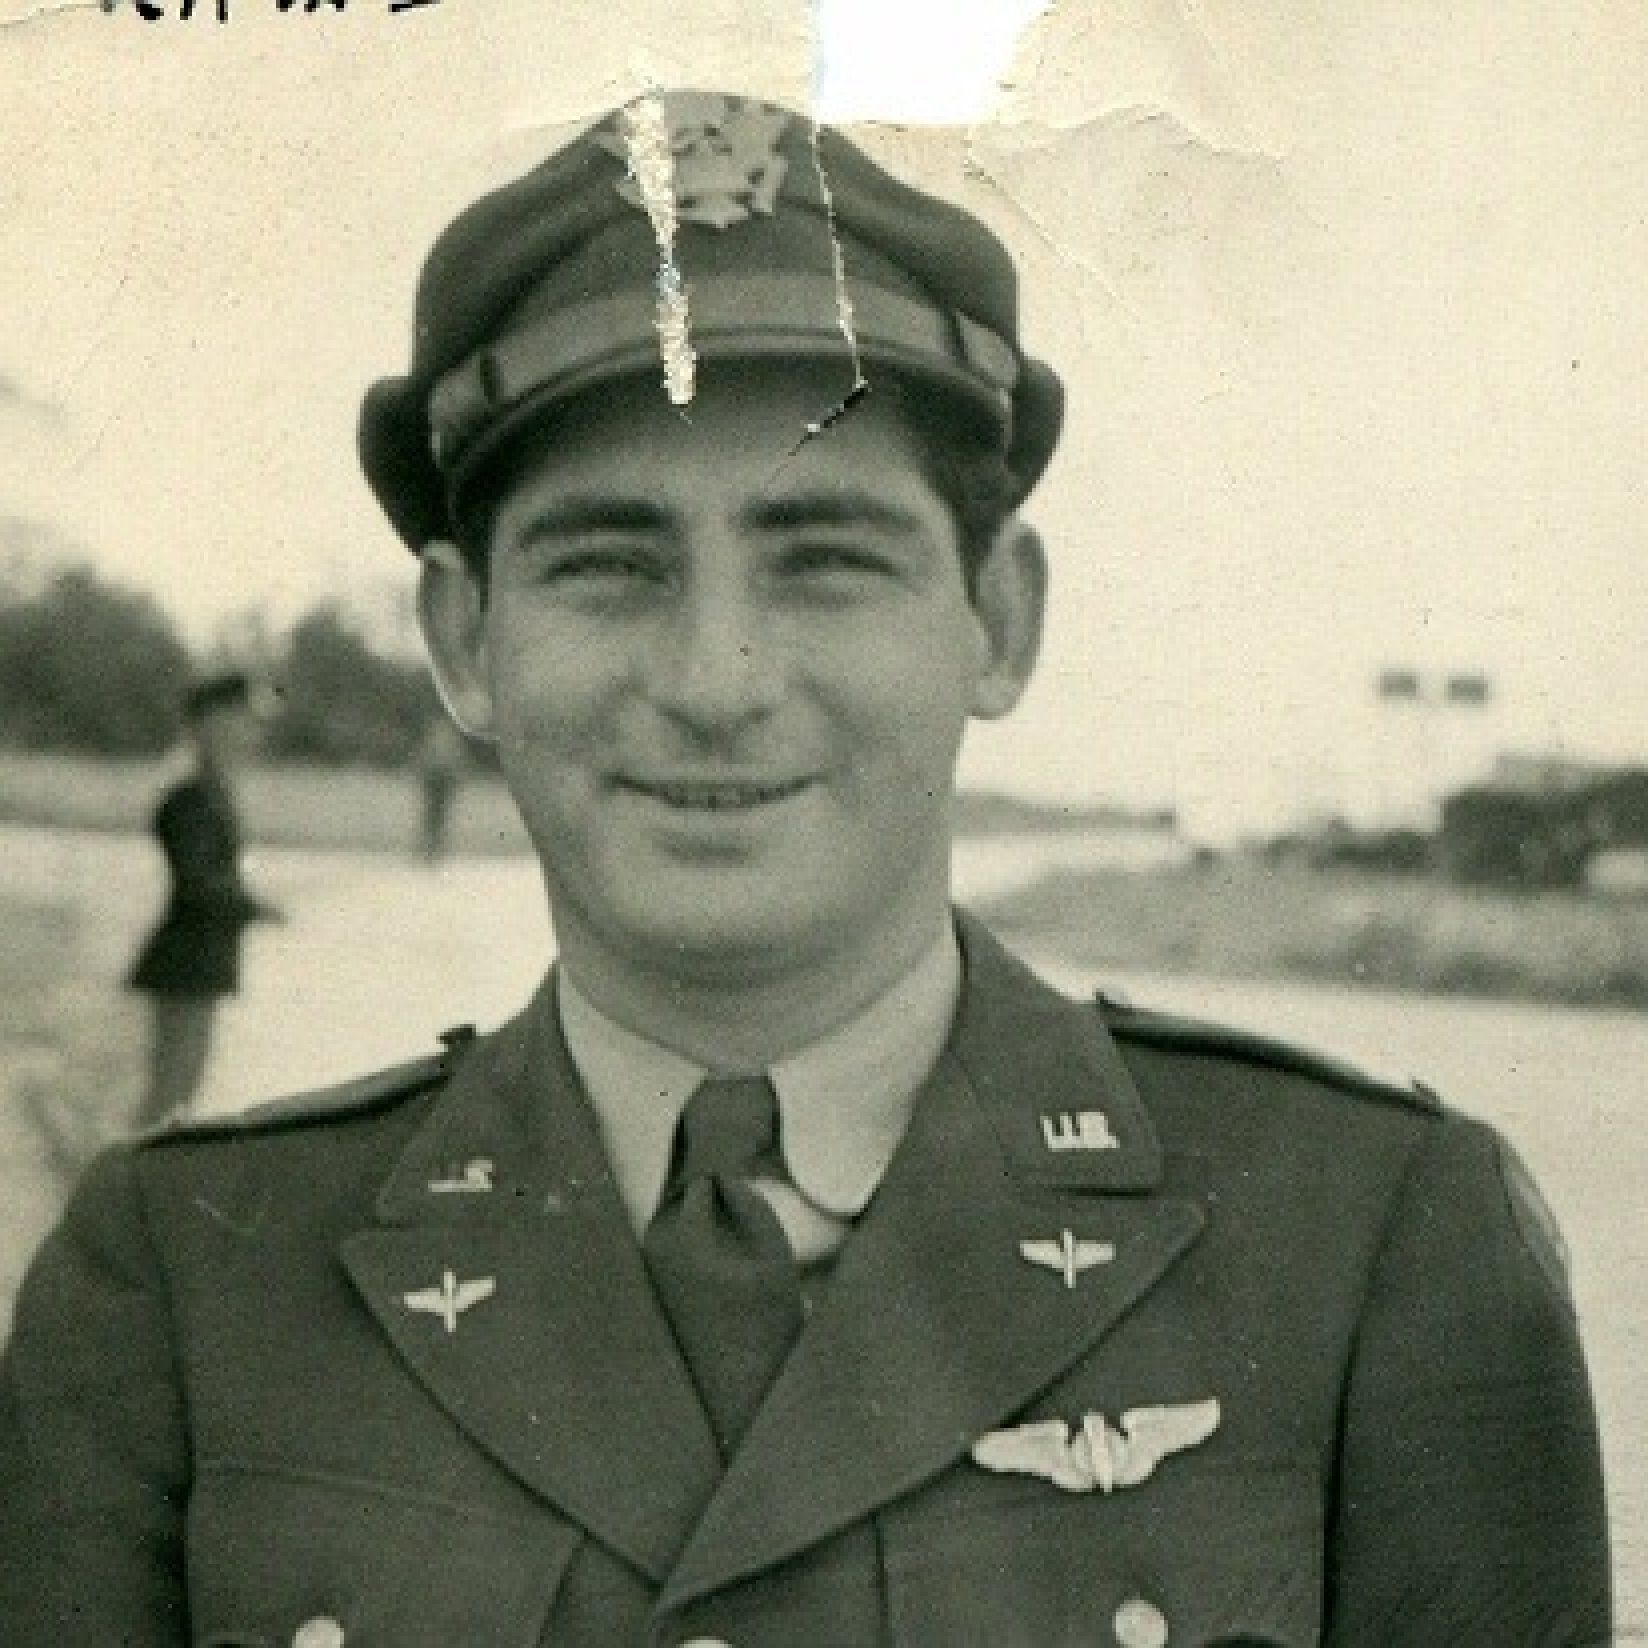 Black and white photograph that is crumpled on the top depicting a young white man smiling and wearing a military hat and uniform.